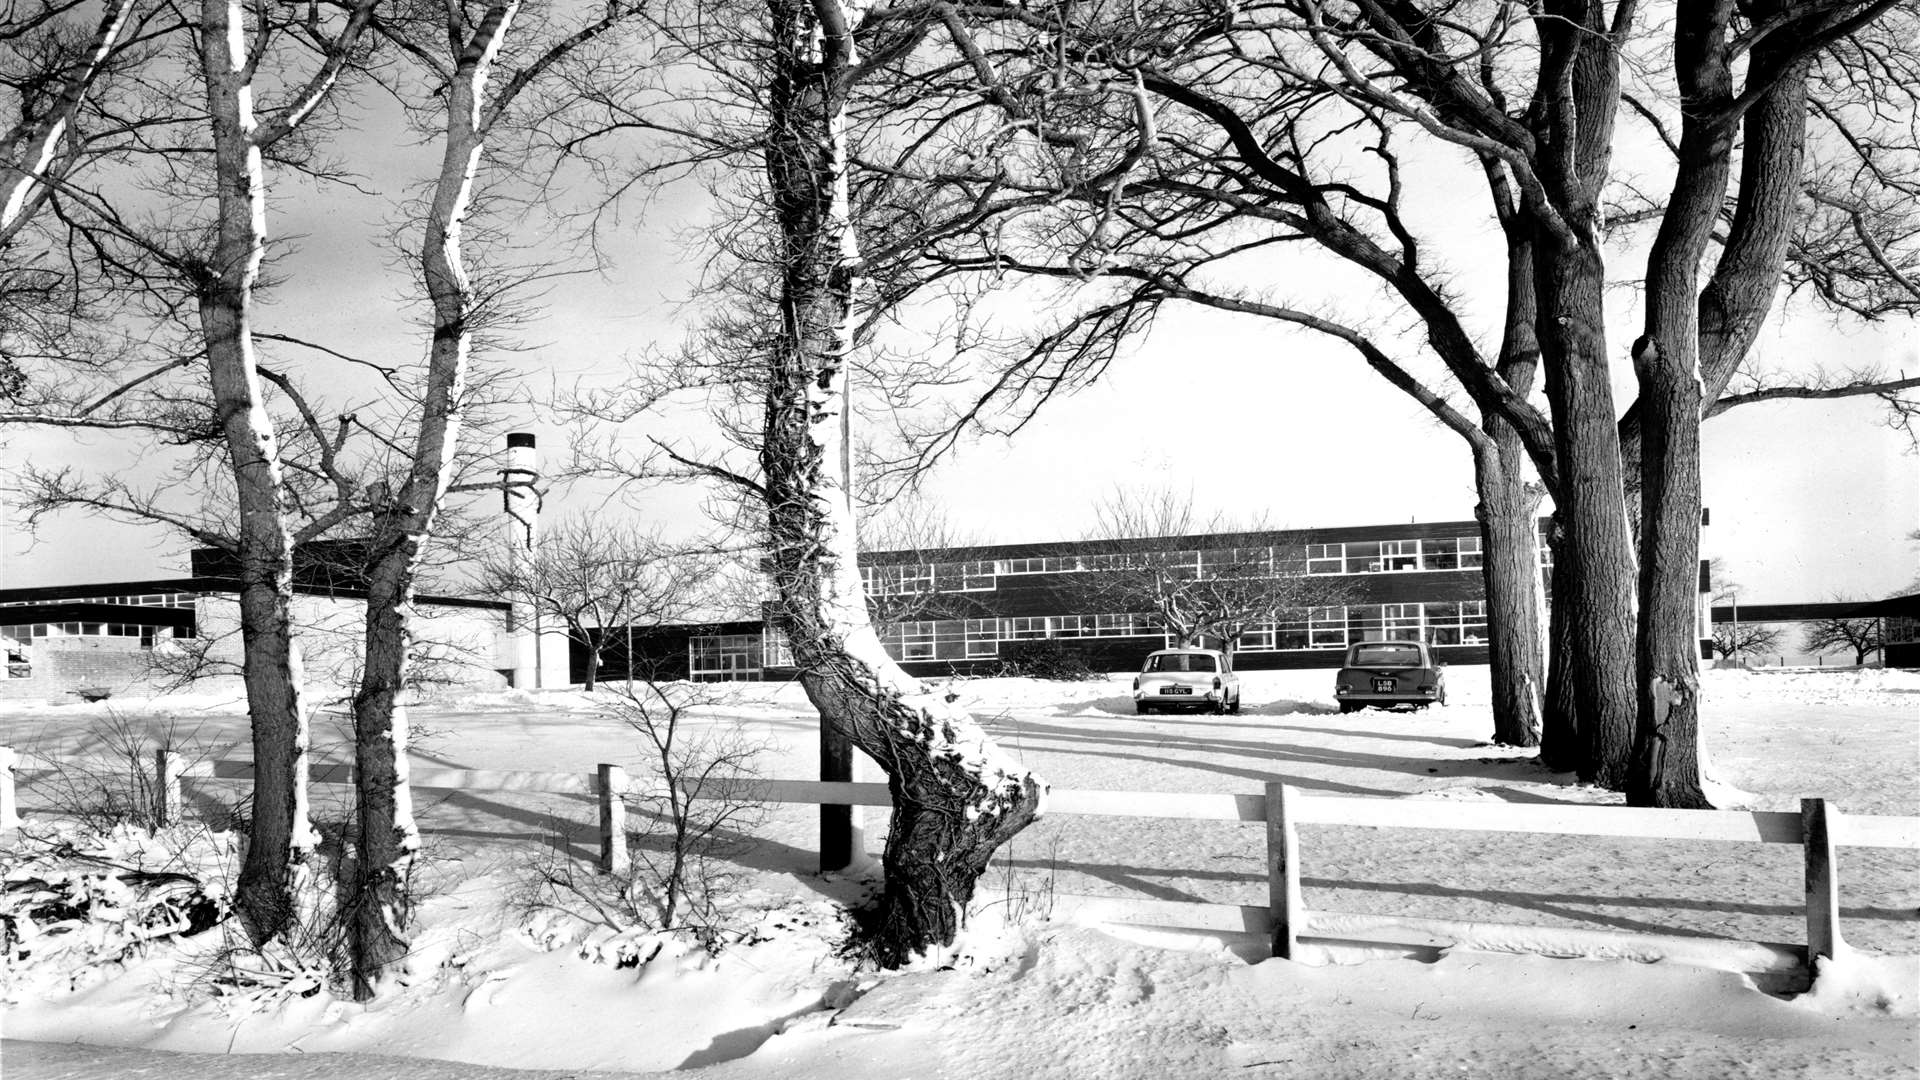 The Towers School in 1967. Picture: Steve Salter